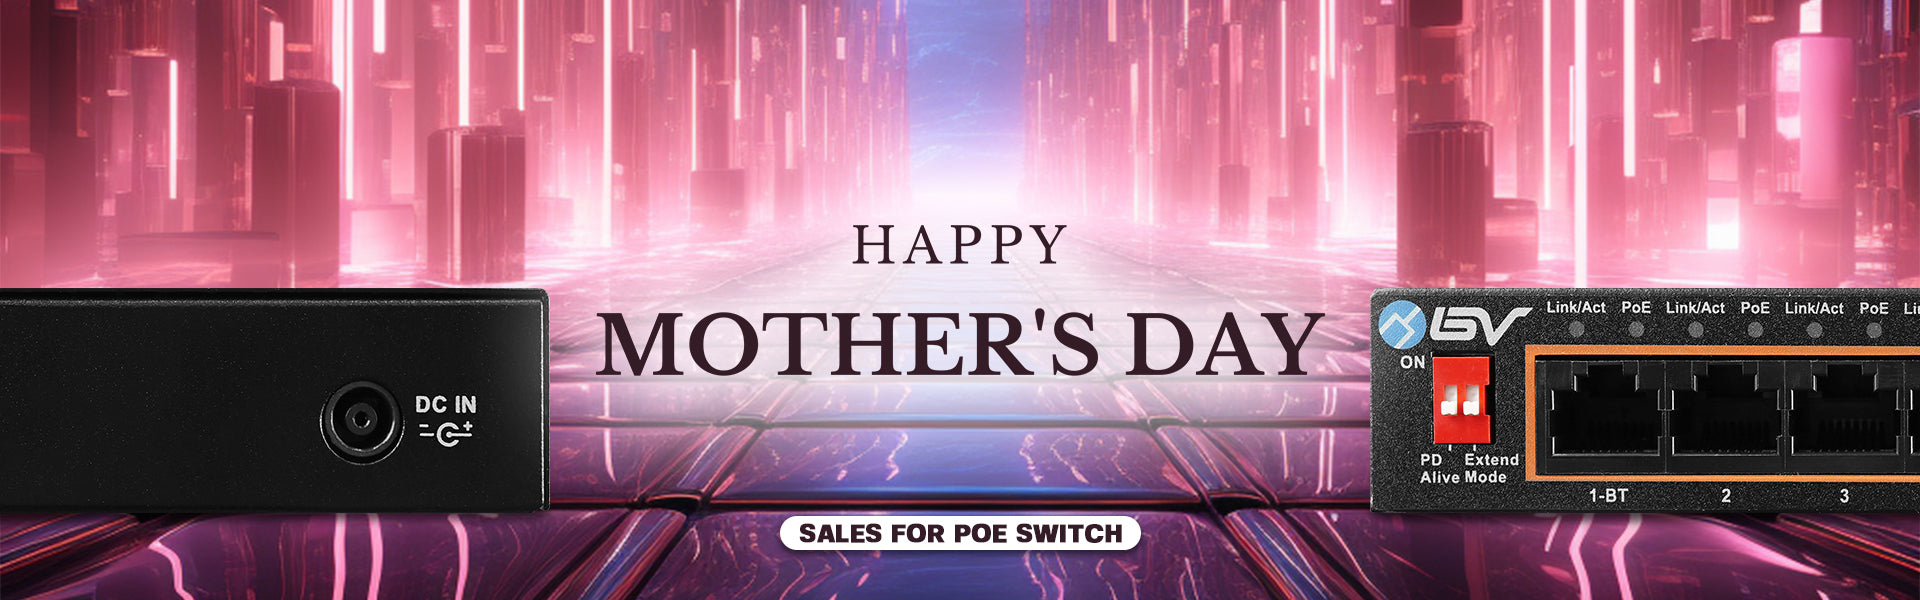 PoE Switch Sale - Mother's Day